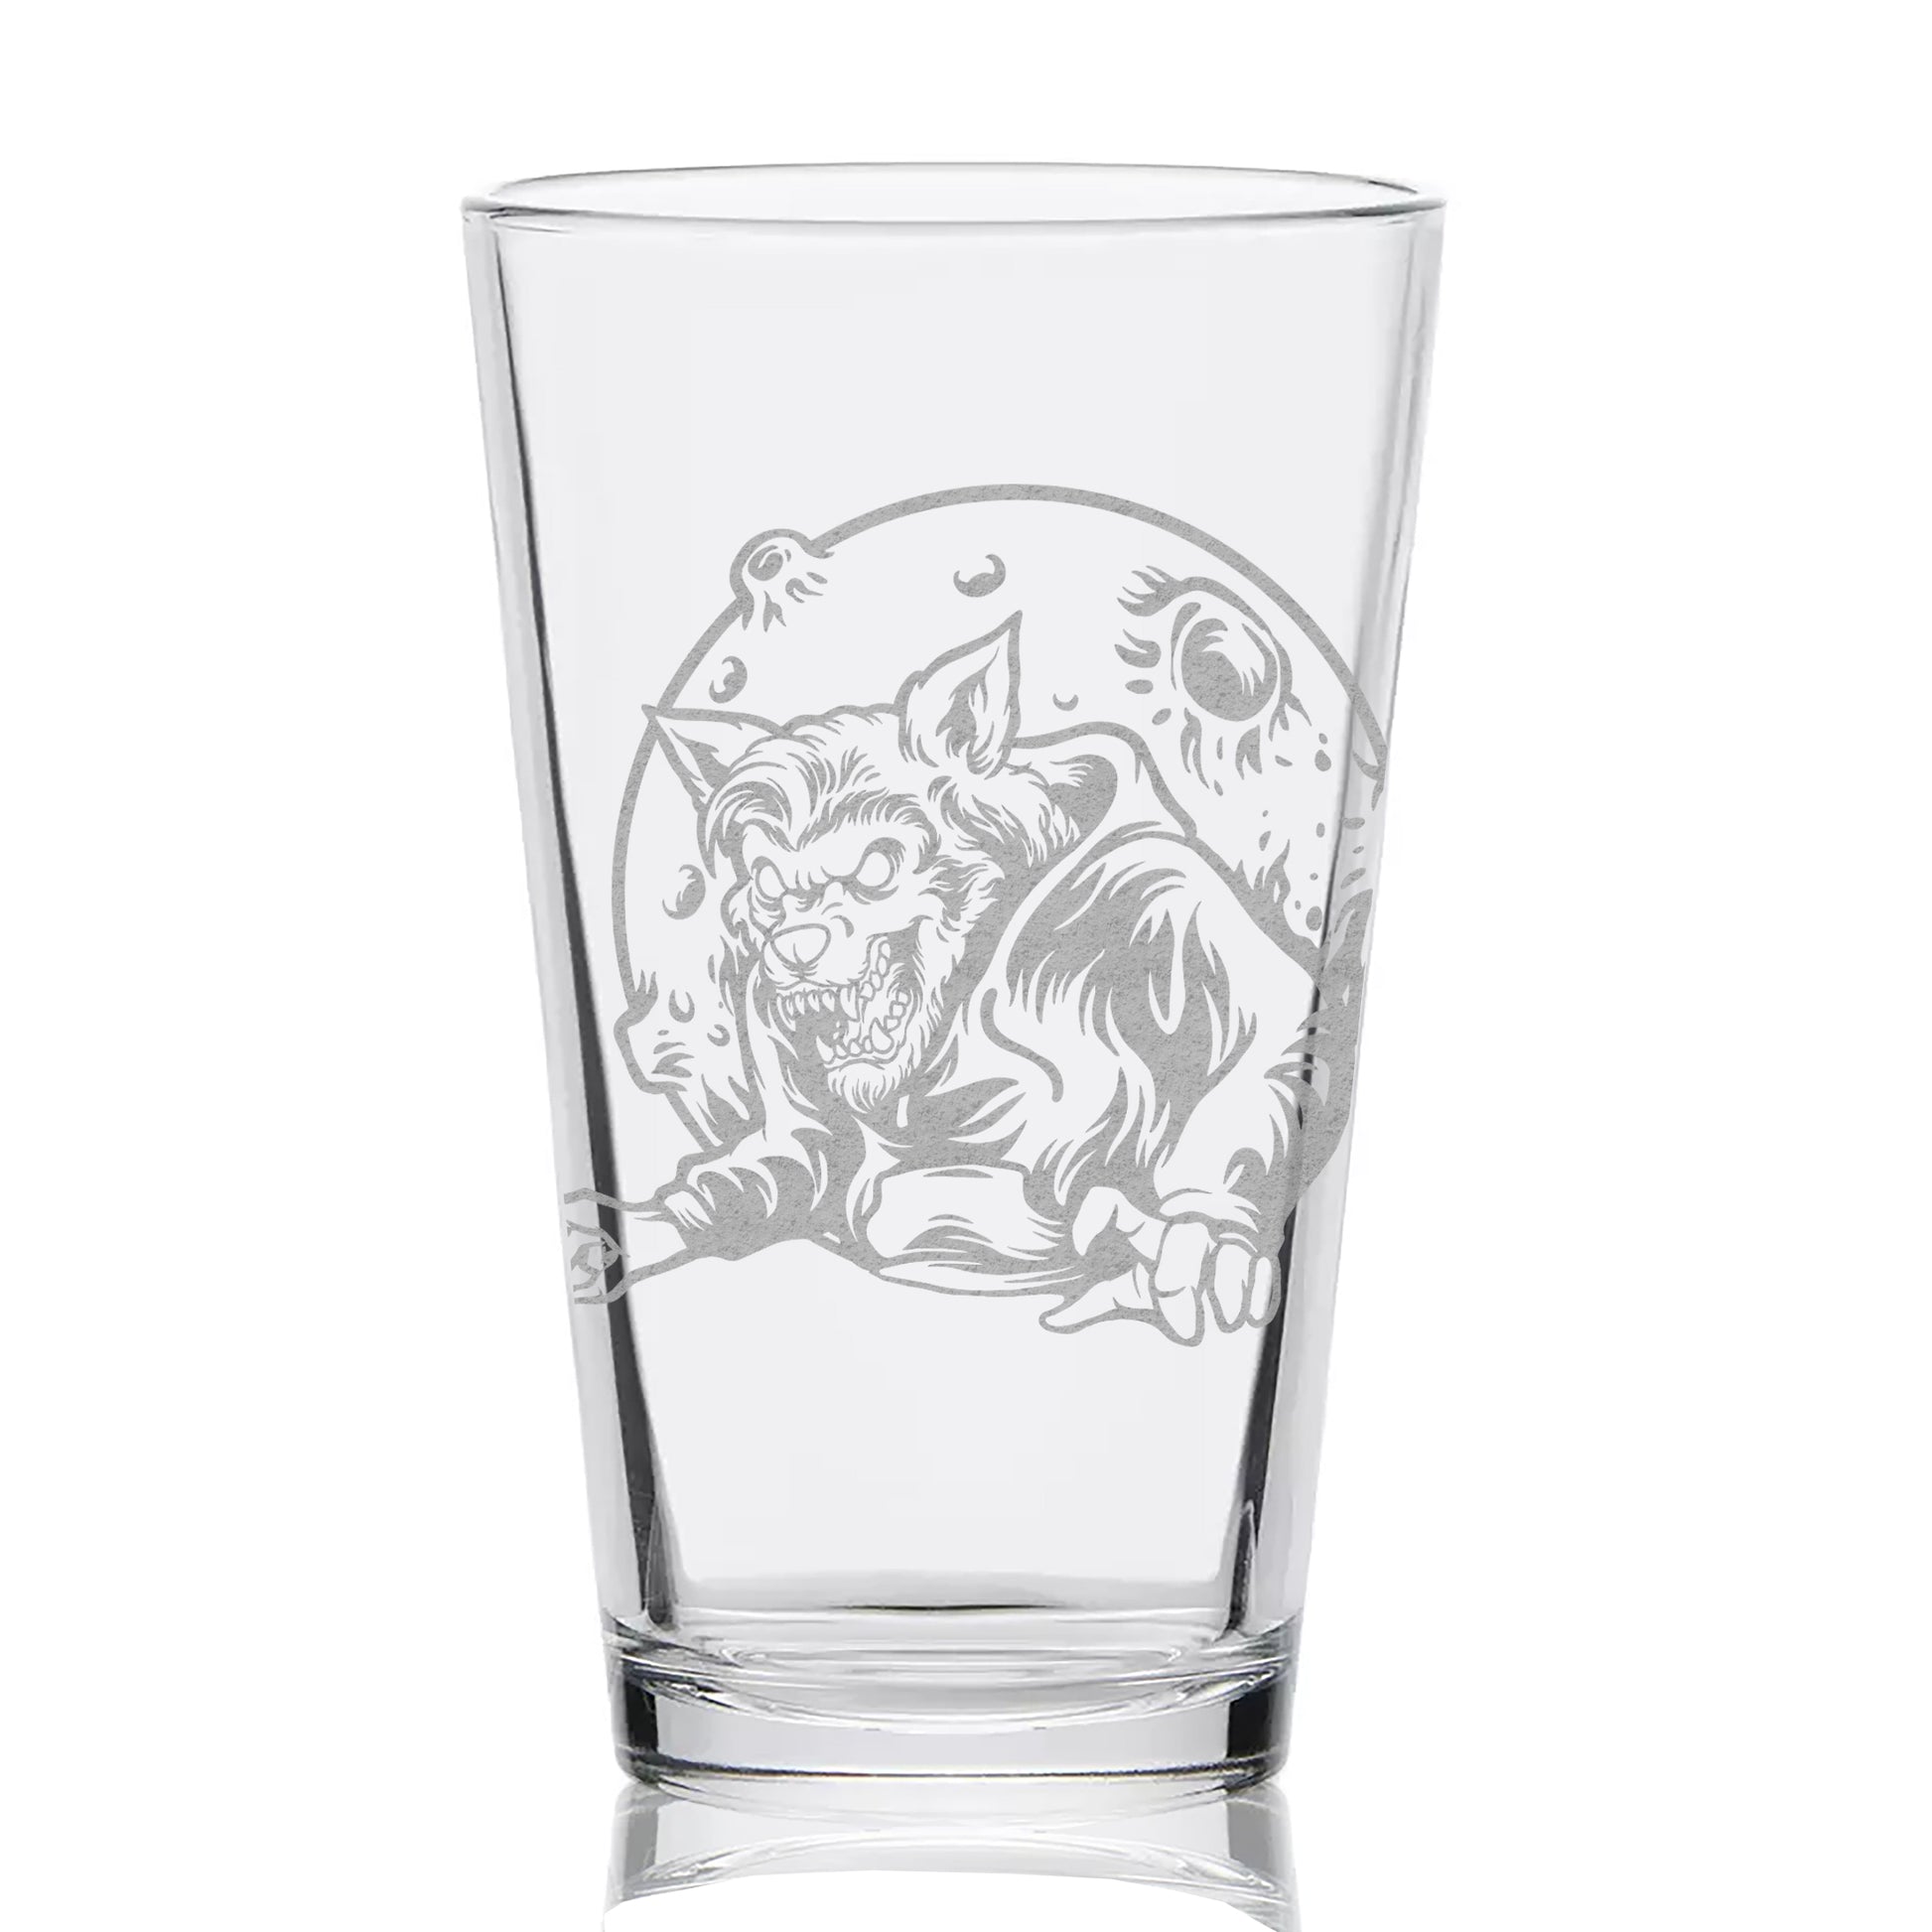 Guinness Beer Glass With Halloween Bats Don't Be Afraid of the Dark  Collectible 20 Oz Pint Glass 